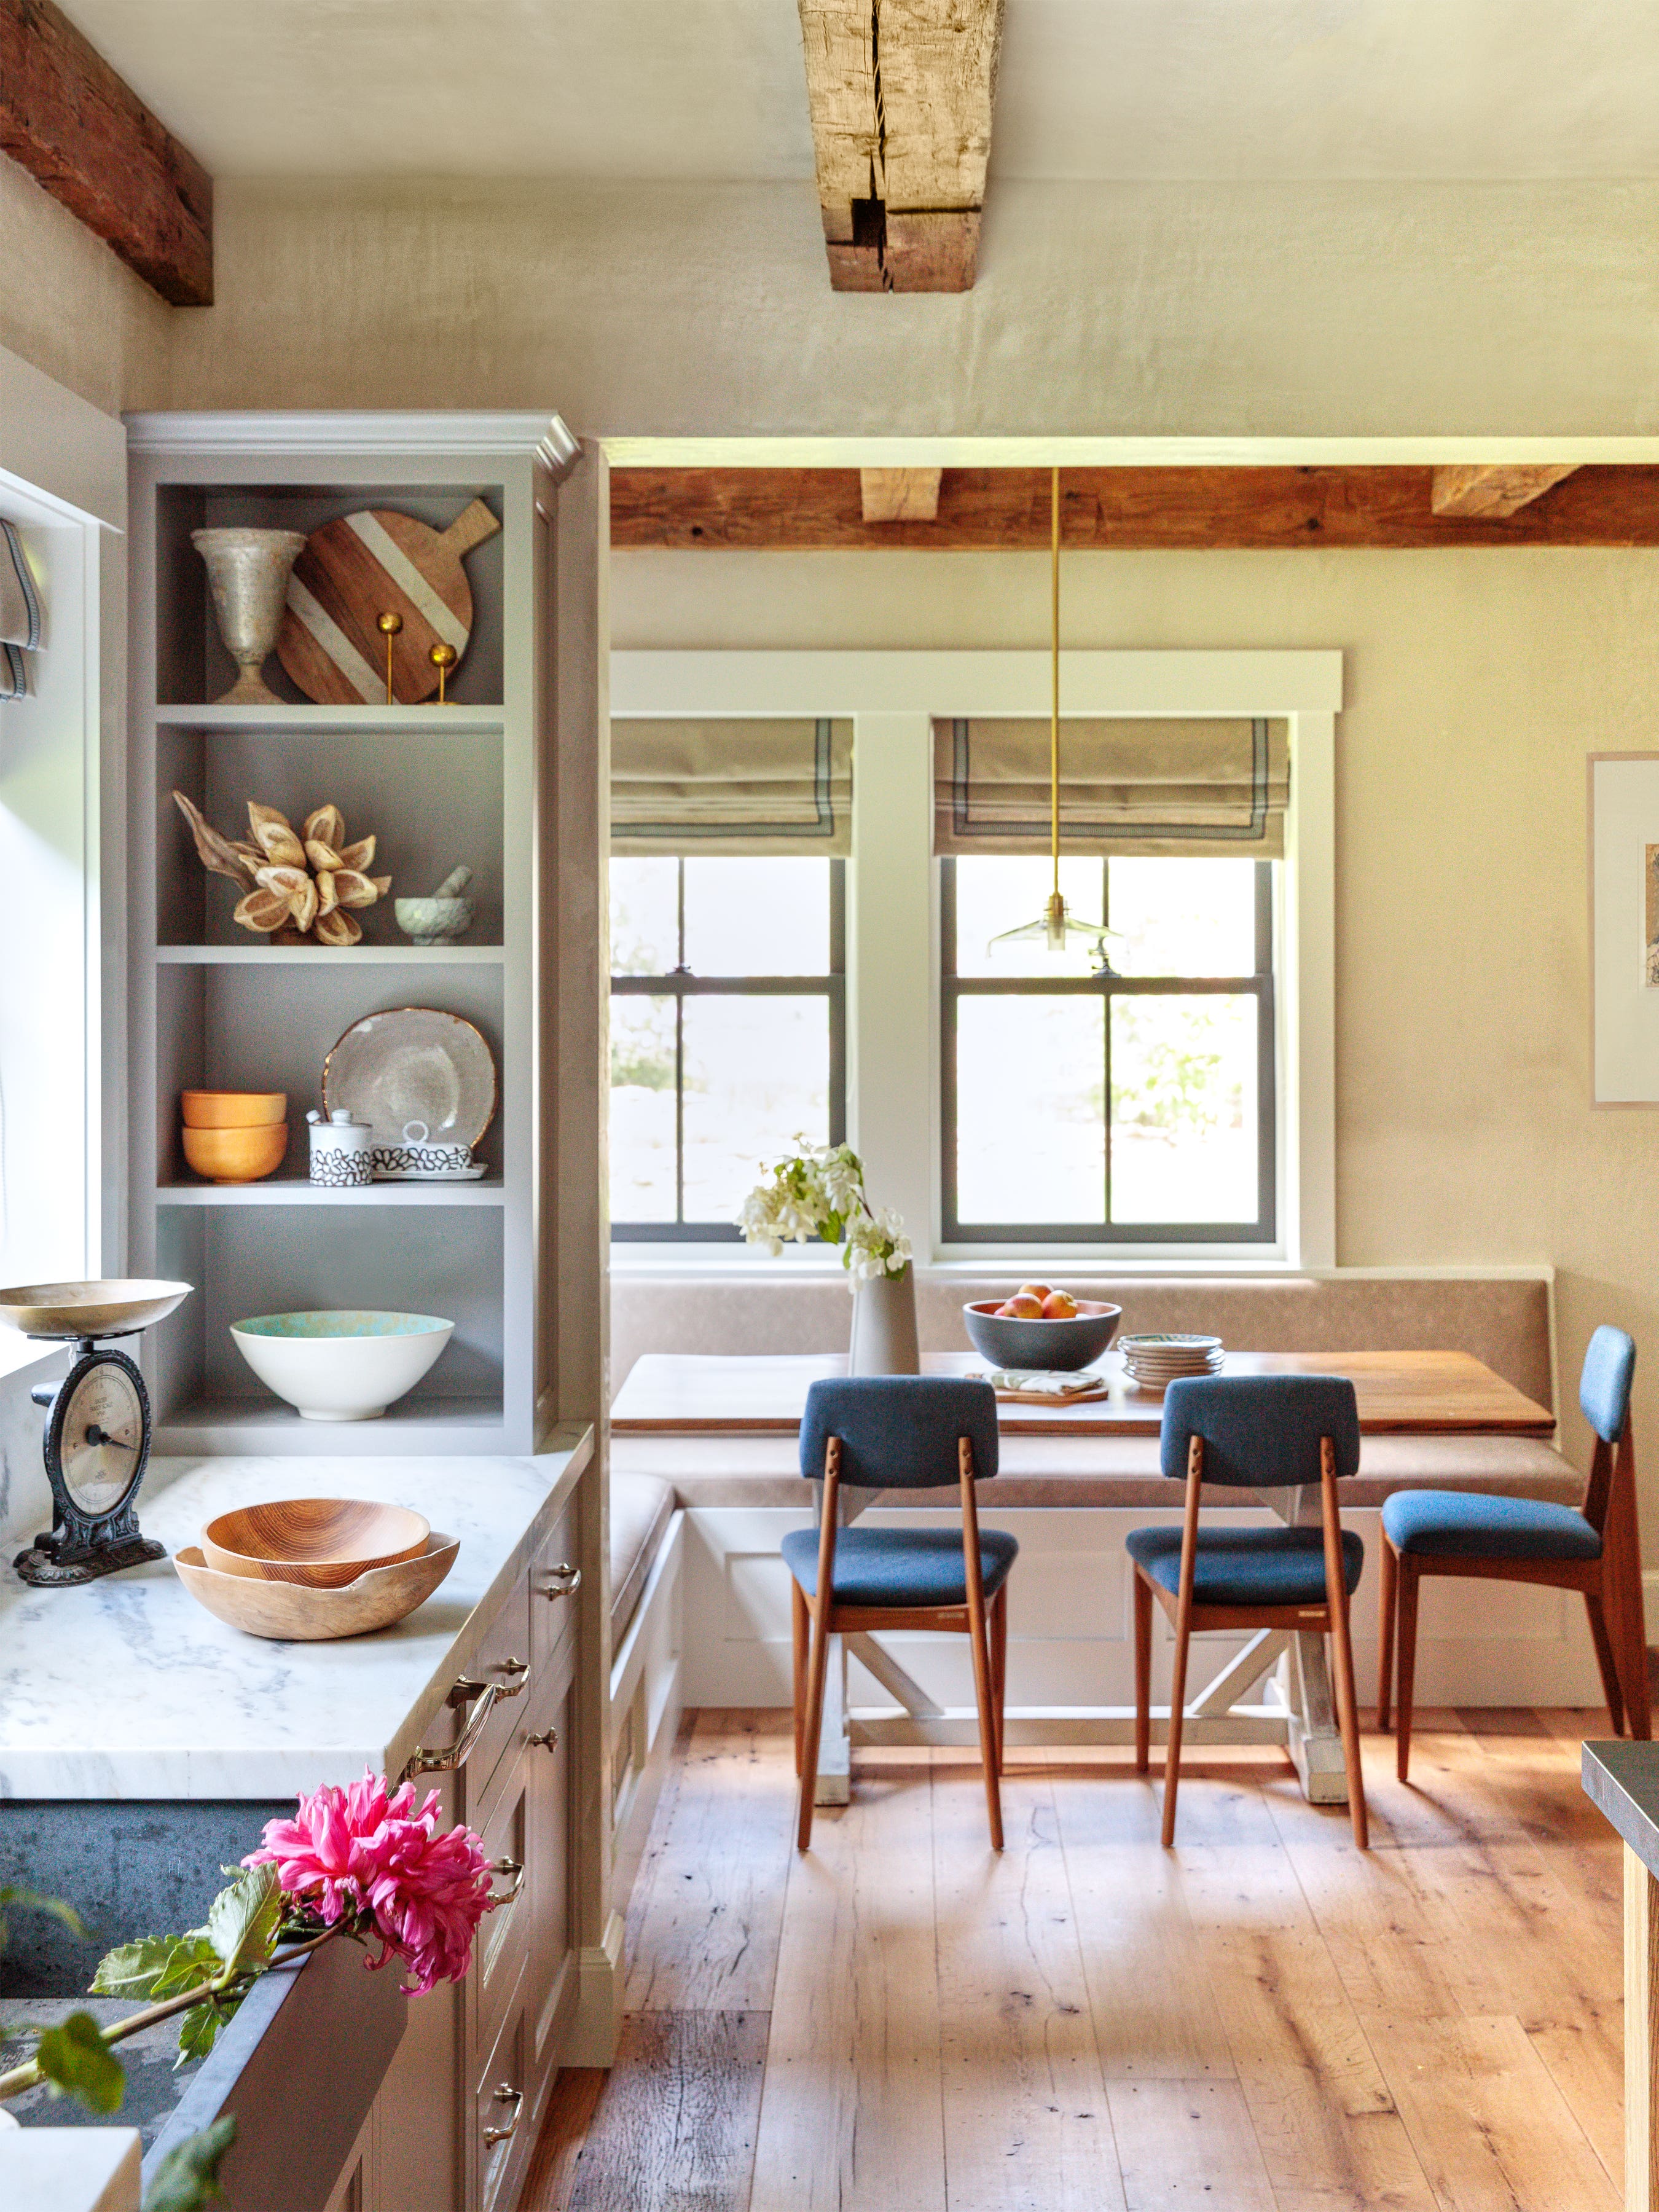 A Massachusetts Farmhouse So Quaint You’ll Want to Move to the Countryside